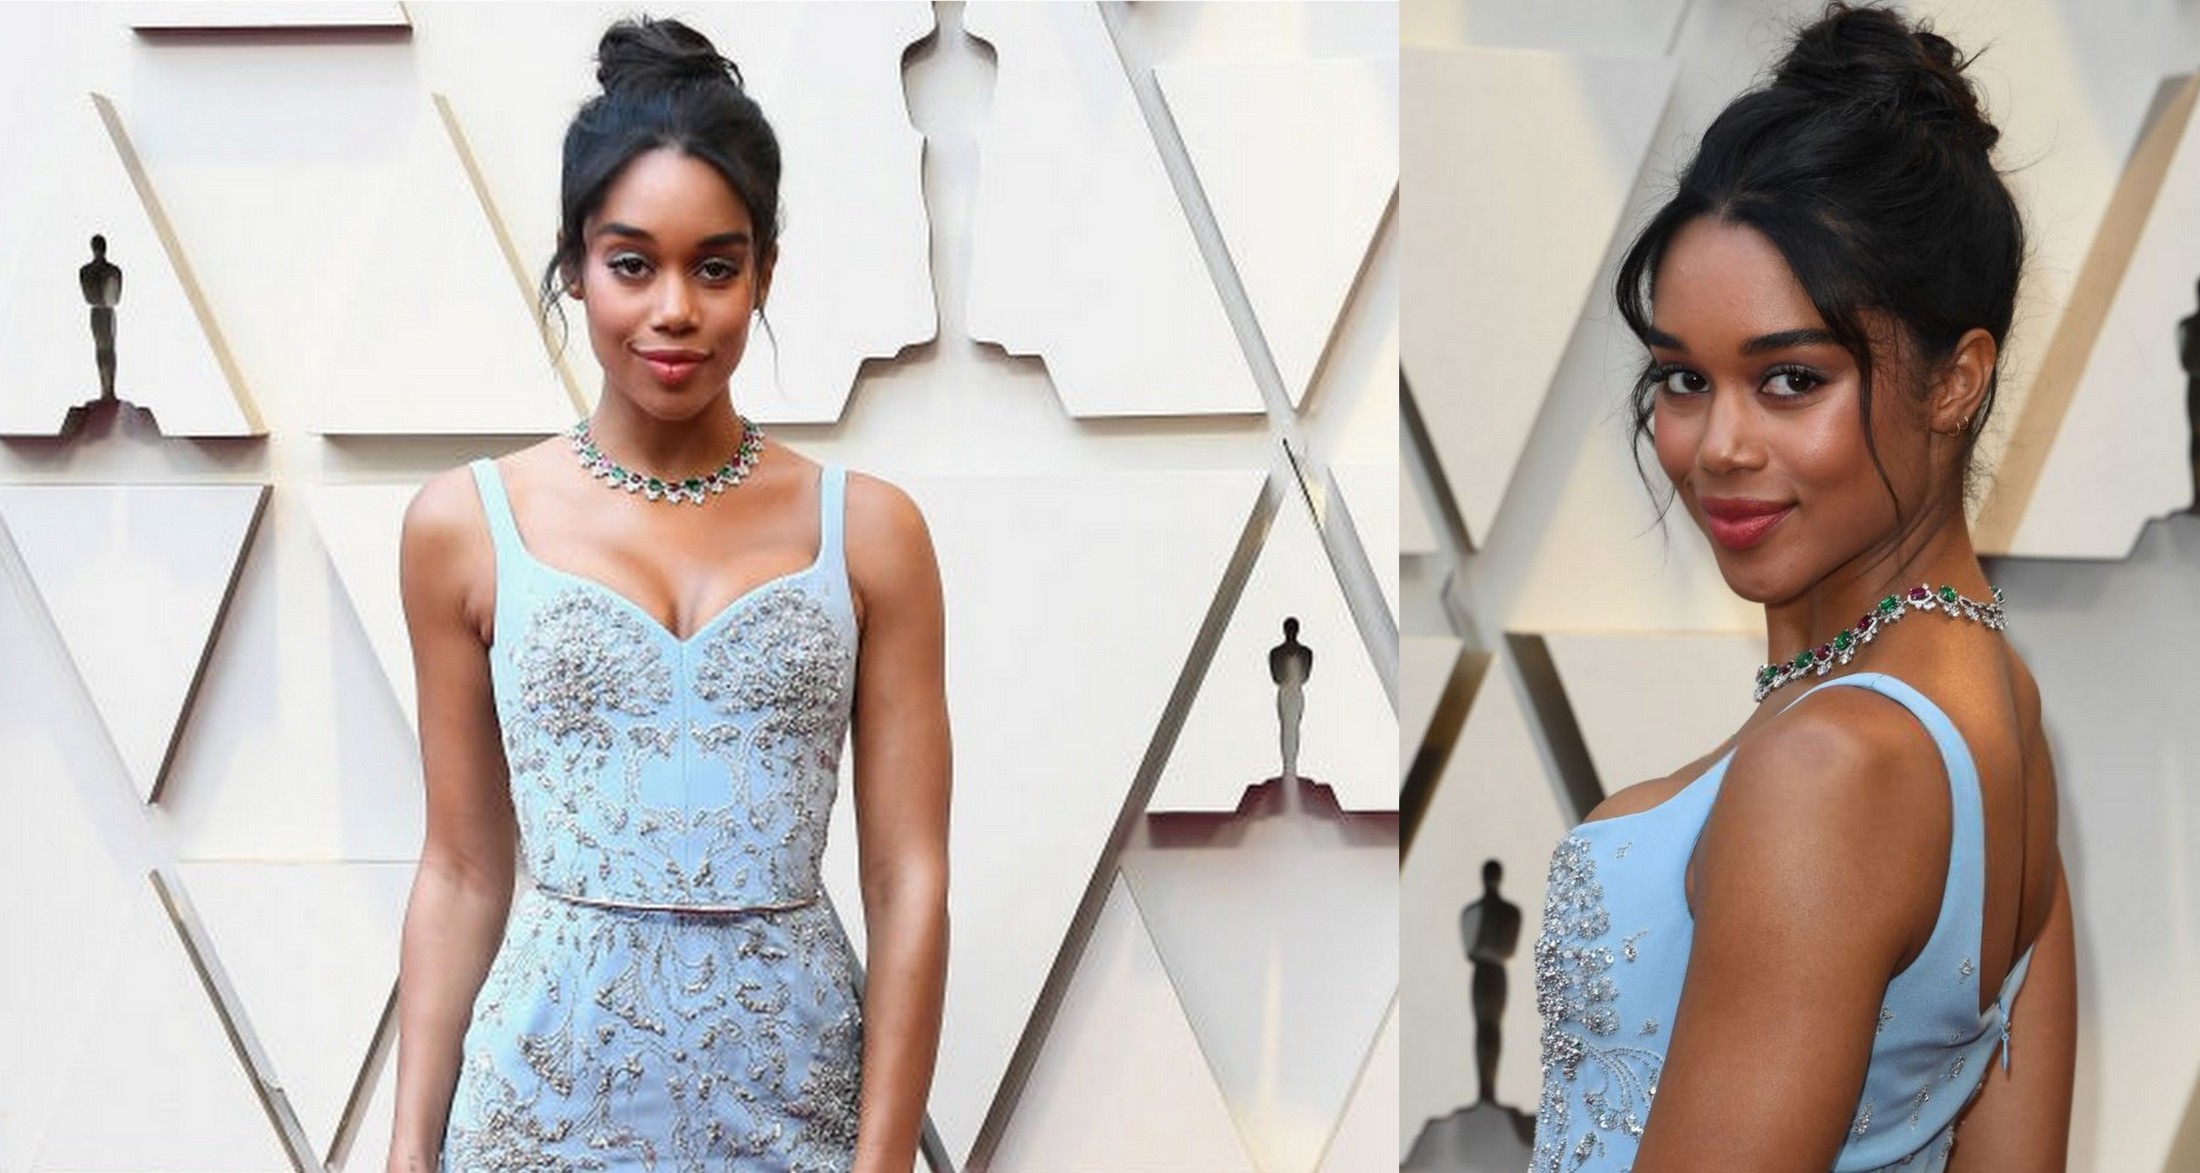 BlacKkKlansman’s Laura Harrier Wows in Bespoke Ethical Louis Vuitton Gown Representing RCGD at the Oscars